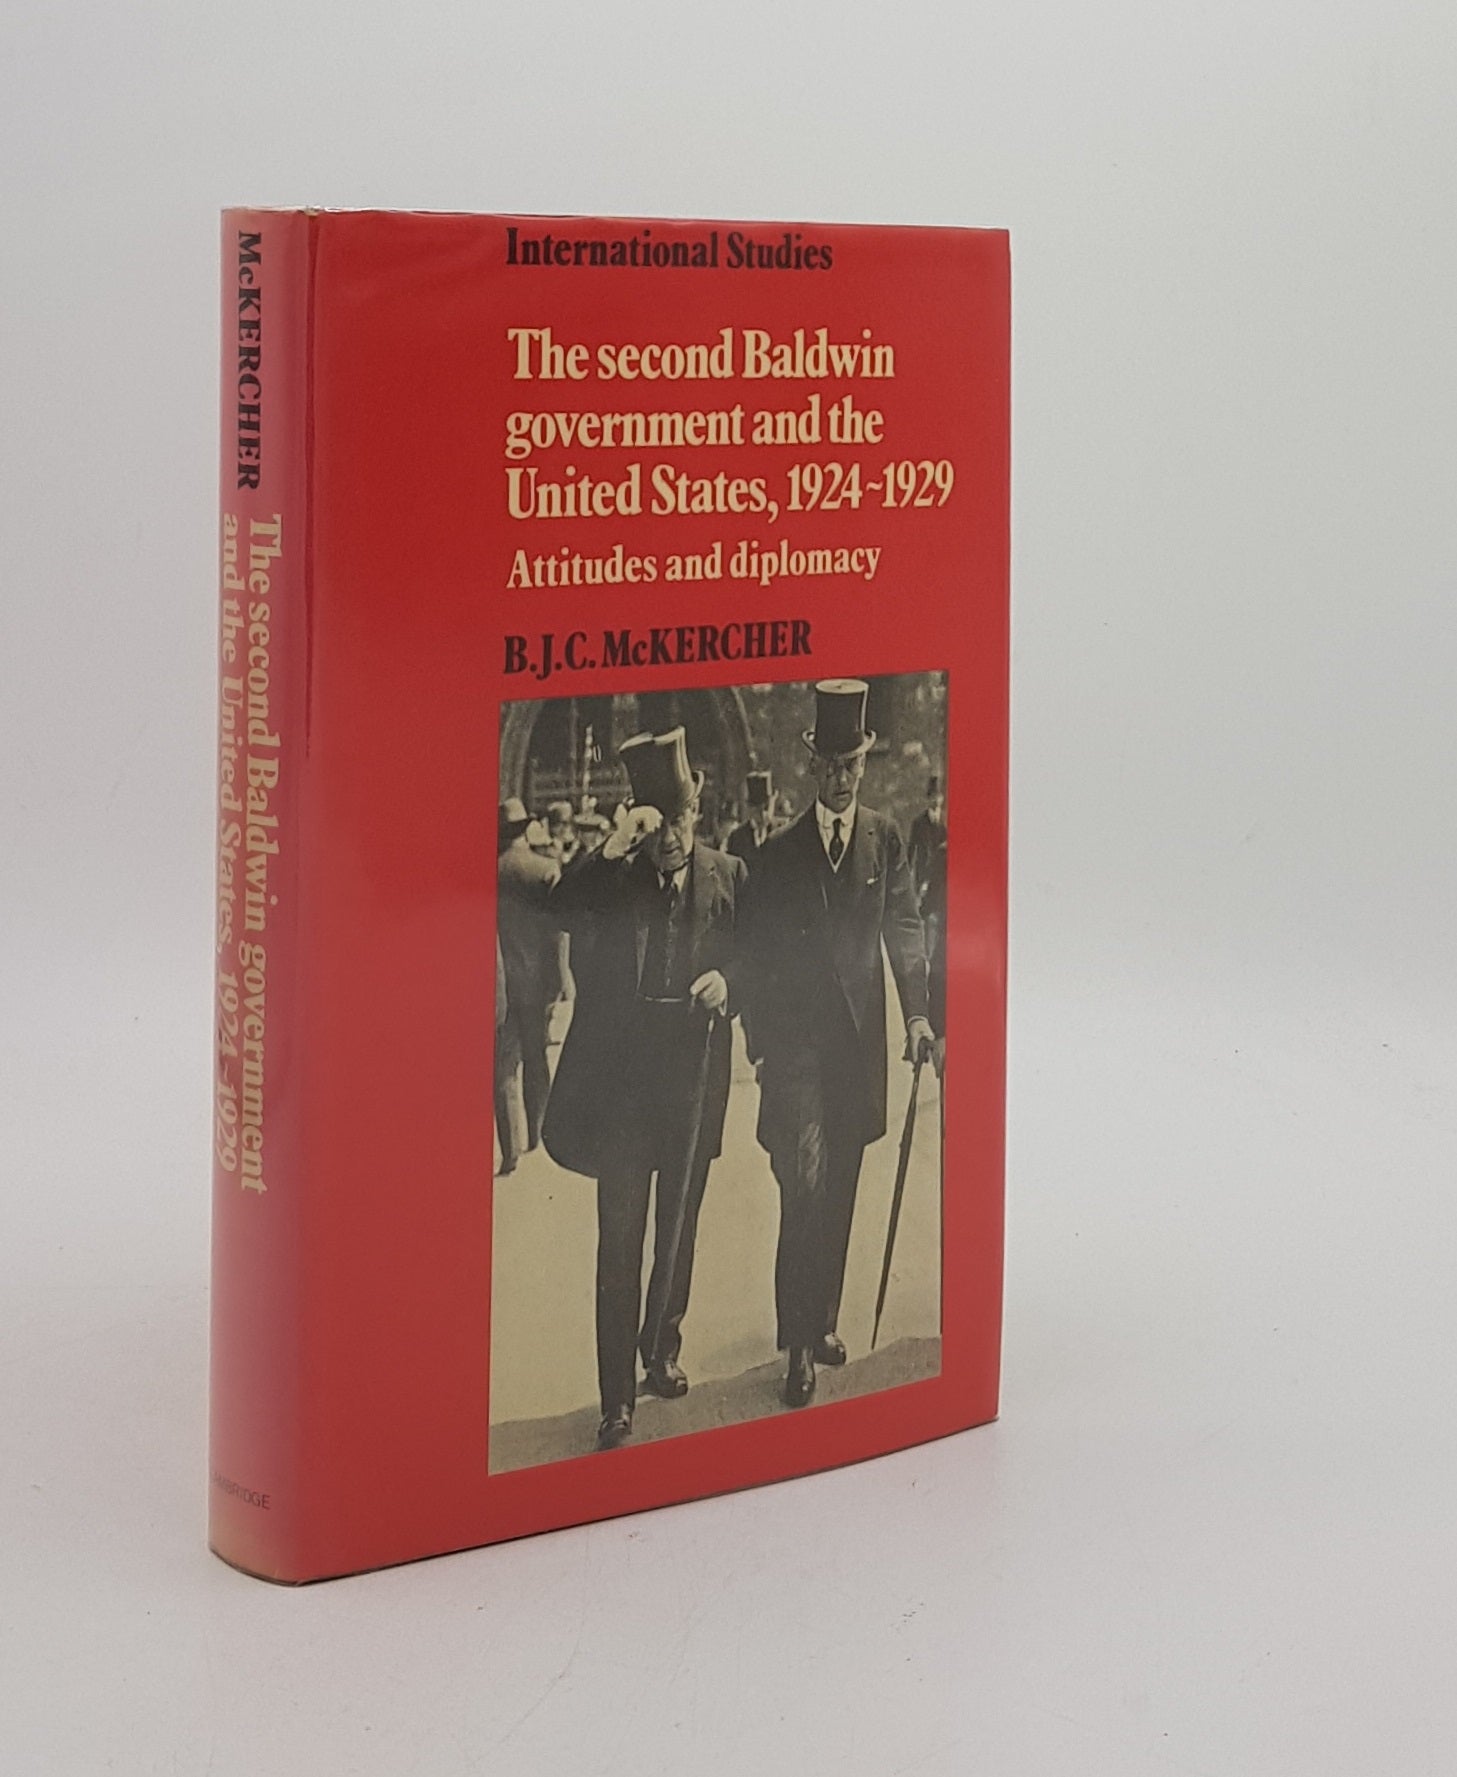 McKERCHER B.J.C. - The Second Baldwin Government and the United States 1924-1929 Attitudes and Diplomacy